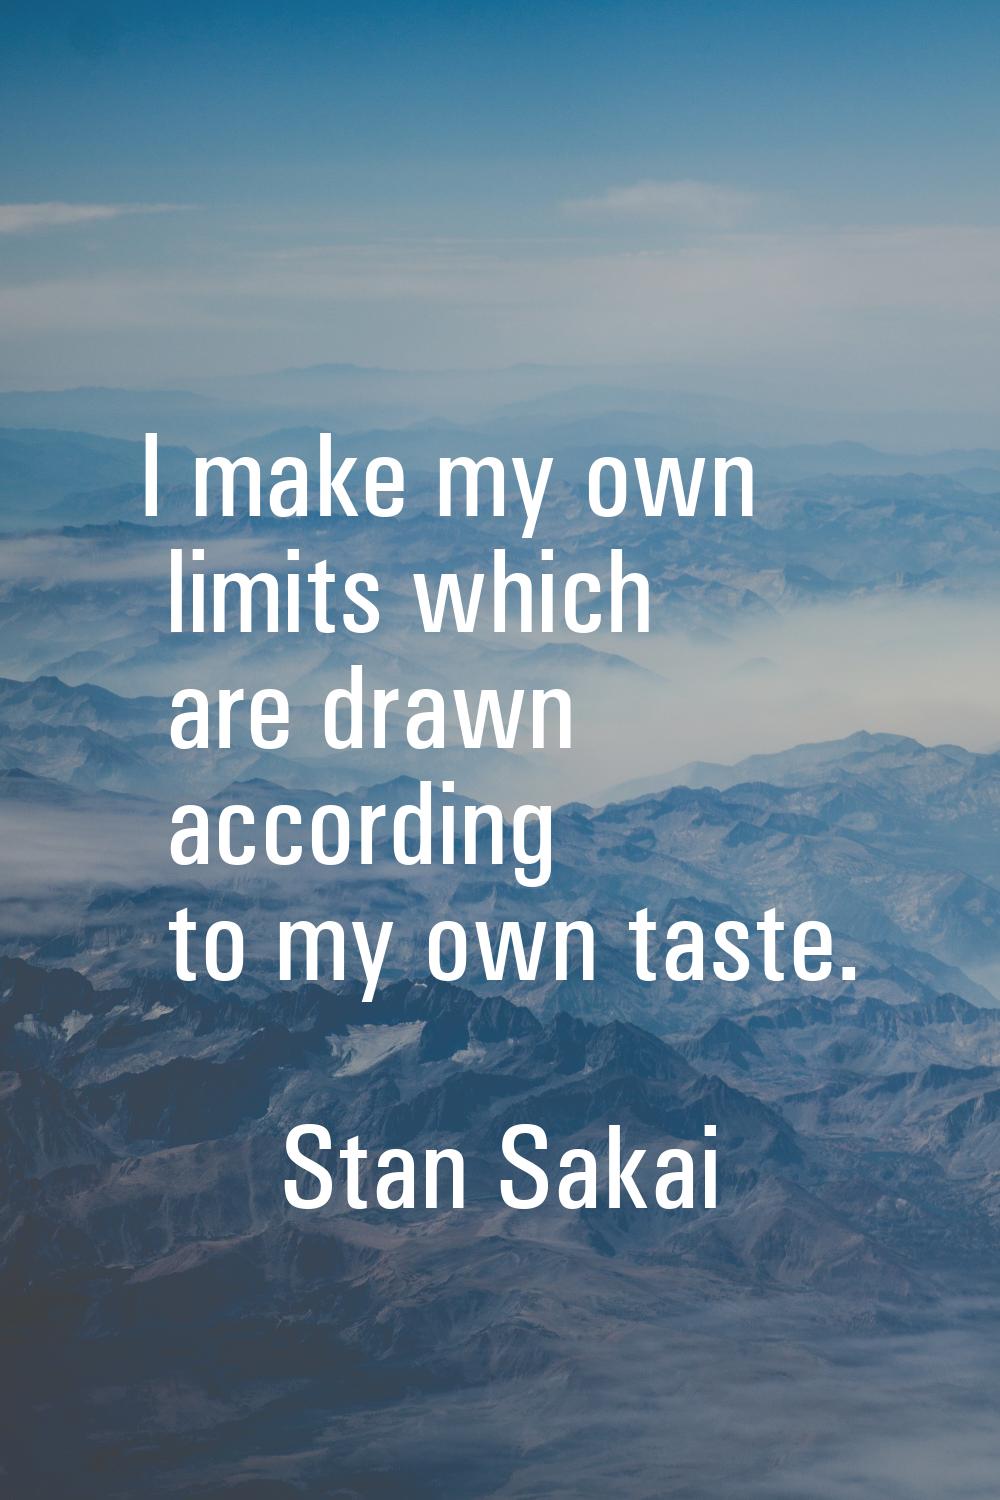 I make my own limits which are drawn according to my own taste.